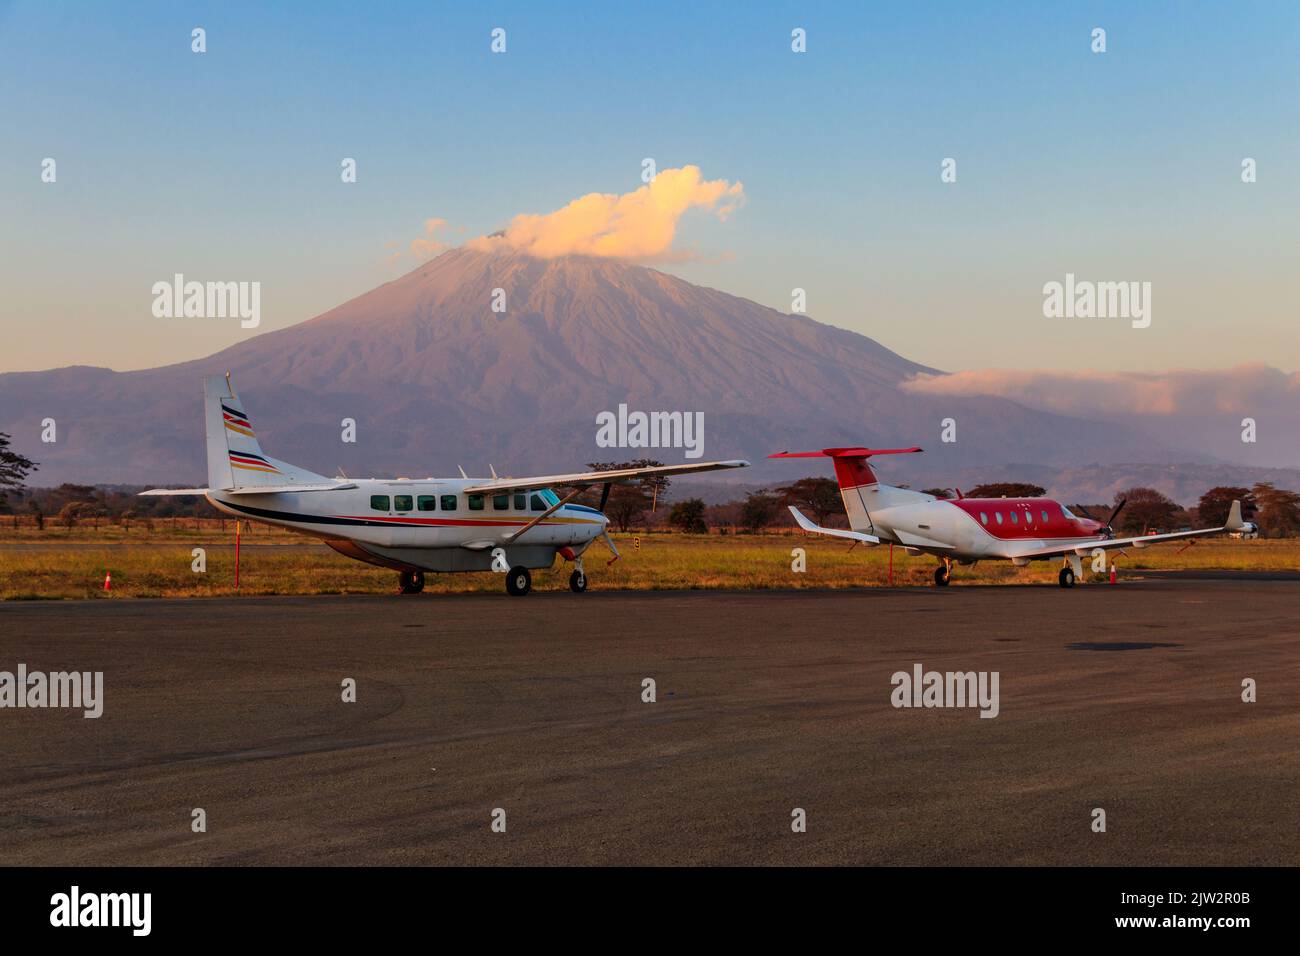 Small propeller airplanes on a background of Meru mountain in Arusha airport, Tanzania Stock Photo